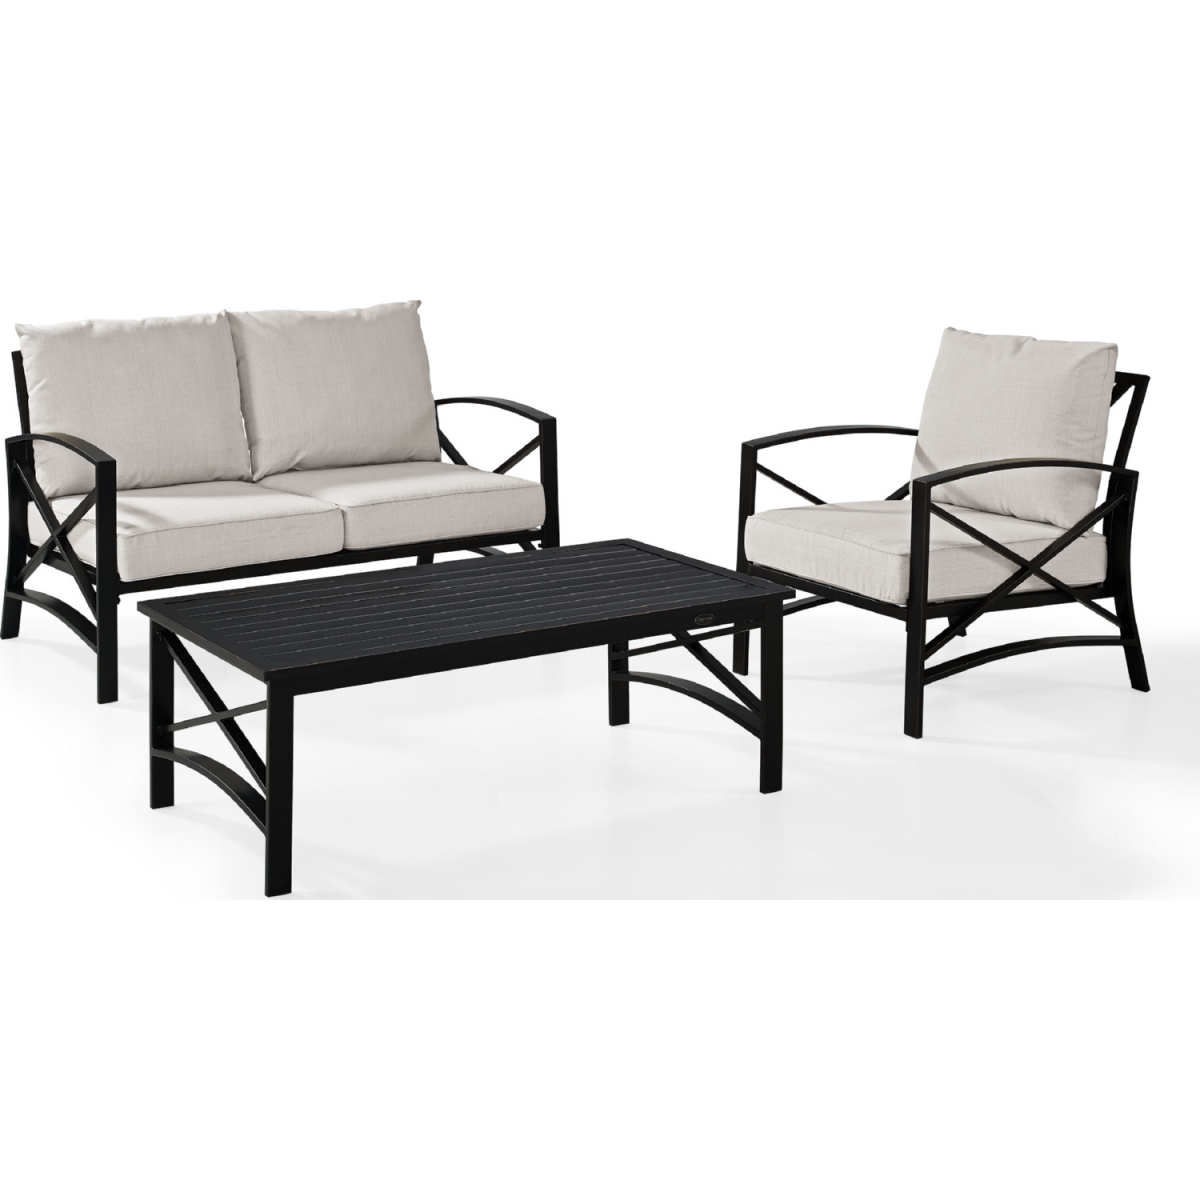 3 Piece Kaplan Outdoor Seating Set With Oatmeal Cushion - Loveseat, Chair, Coffee Table